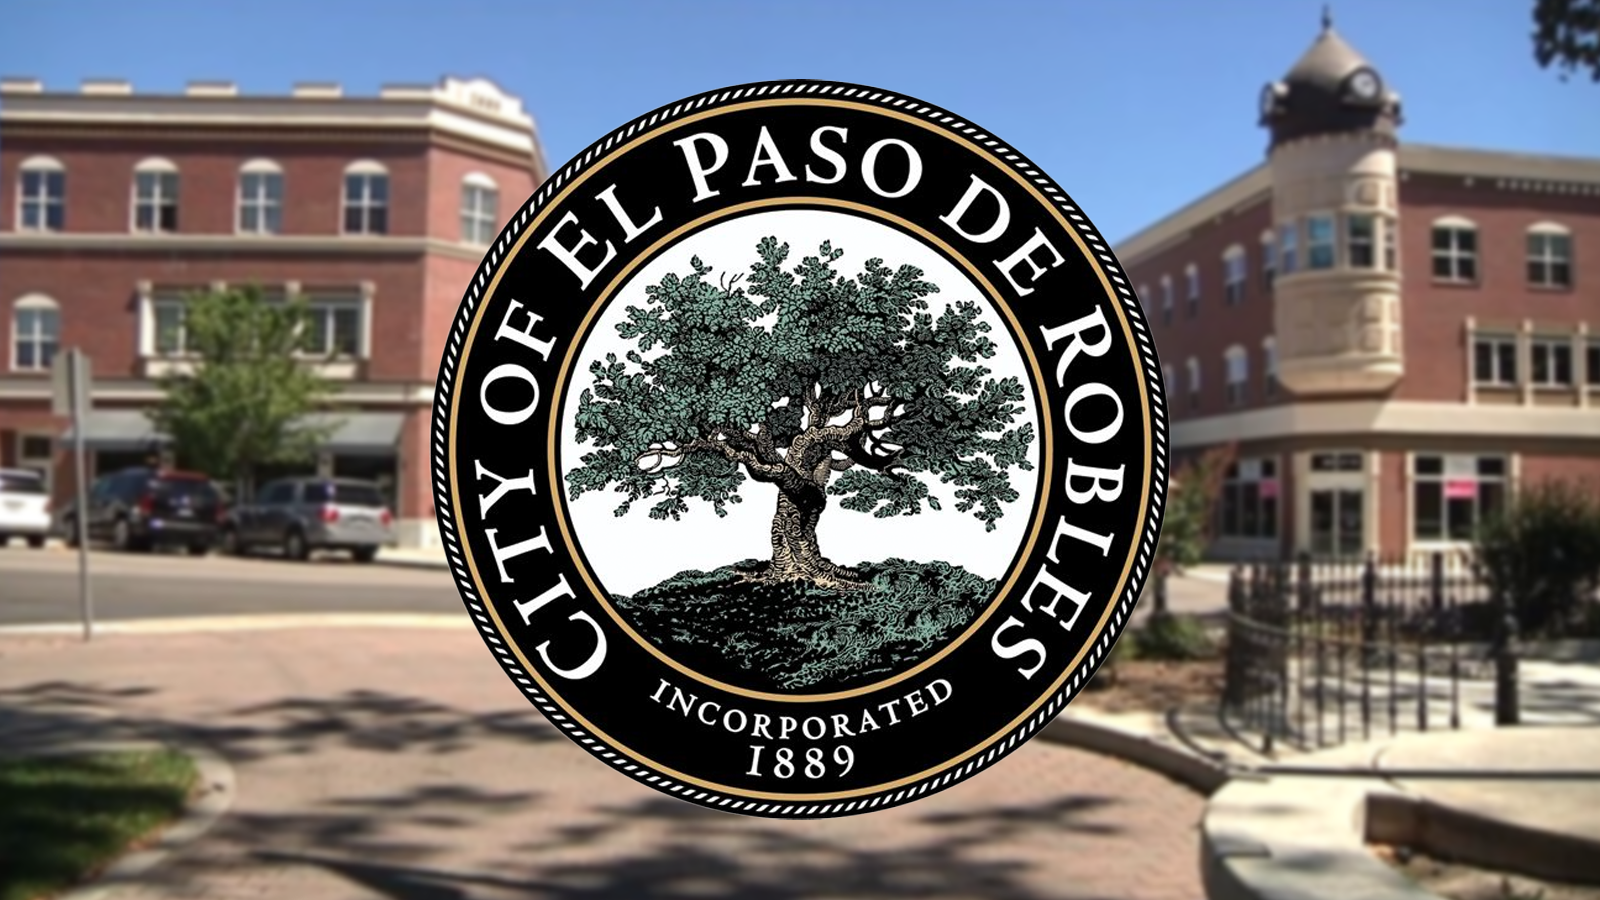 City of Paso Robles announces permanent road closure at Airport Road and Highway 46 intersection Friday